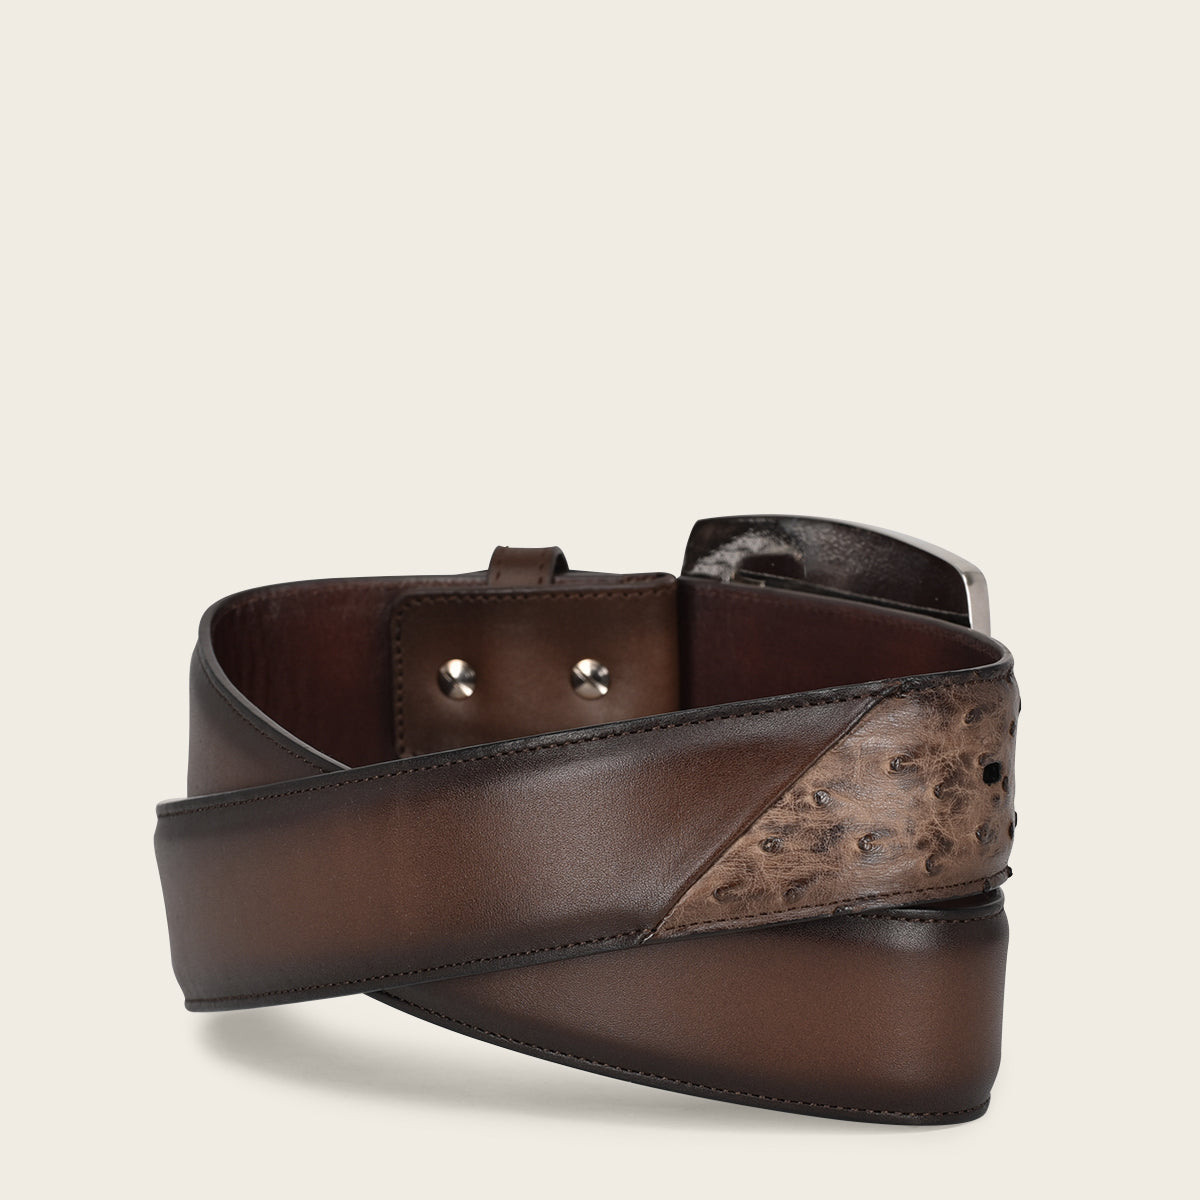 Hand-painted brown exotic leather western belt with double metal insert